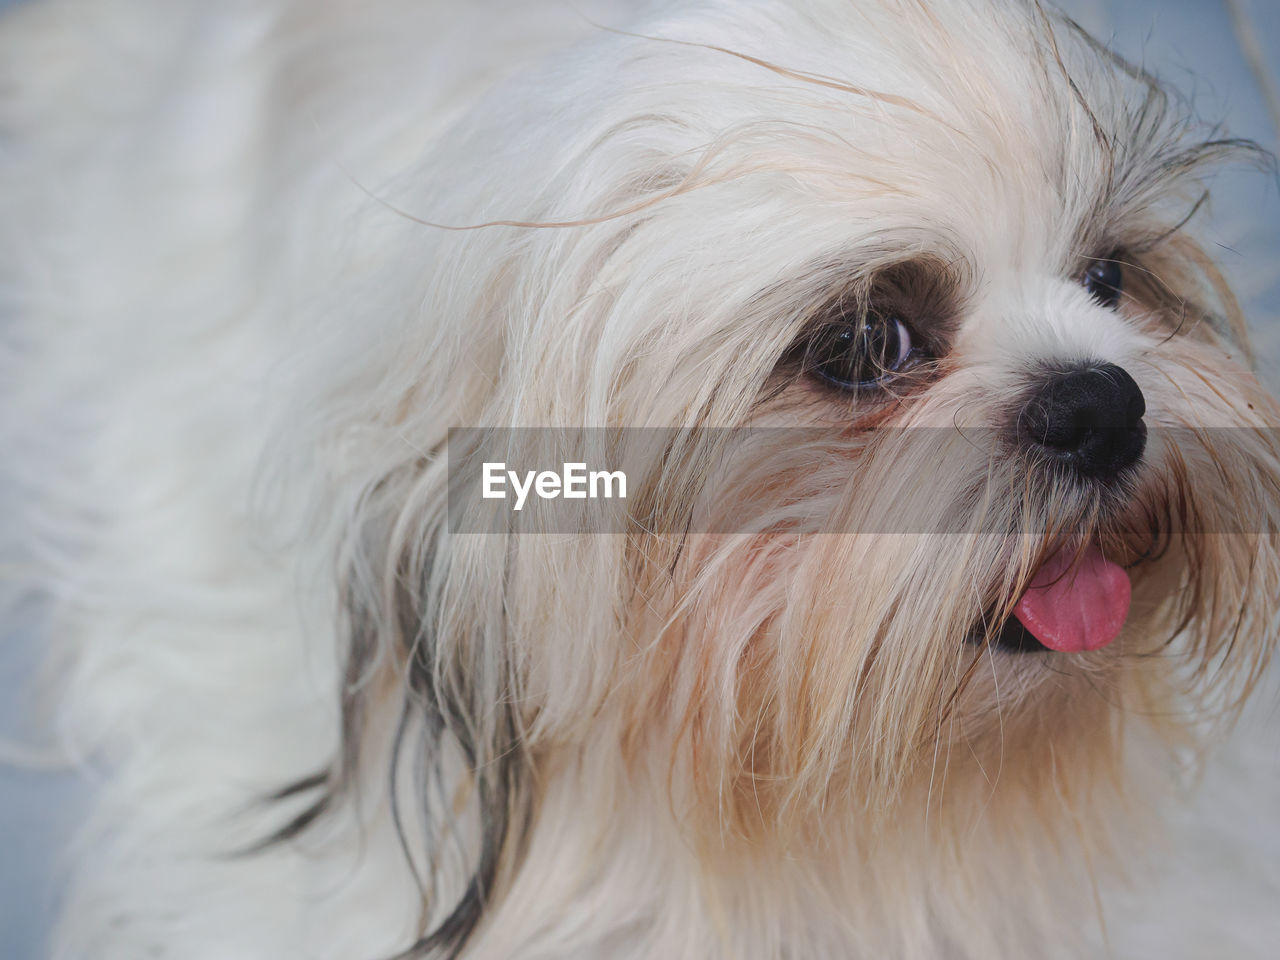 pet, one animal, animal themes, animal, domestic animals, canine, dog, mammal, white, animal hair, löwchen, animal body part, close-up, lap dog, havanese, maltese, portrait, cute, carnivore, no people, animal head, sticking out tongue, morkie, facial expression, looking at camera, focus on foreground